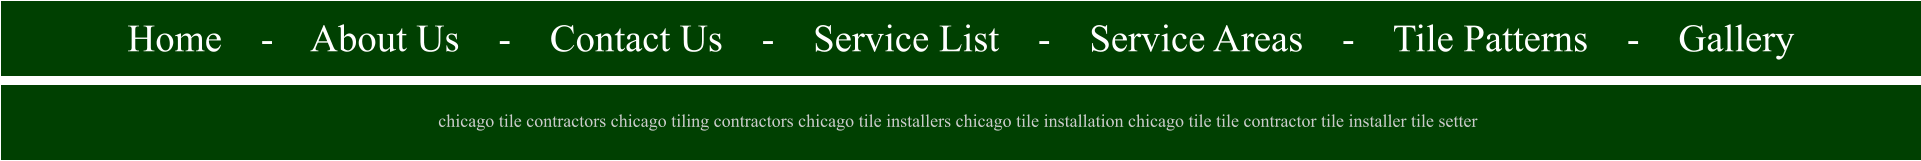 Home    -    About Us    -    Contact Us    -    Service List    -    Service Areas    -    Tile Patterns    -    Gallery                                                             chicago tile contractors chicago tiling contractors chicago tile installers chicago tile installation chicago tile tile contractor tile installer tile setter